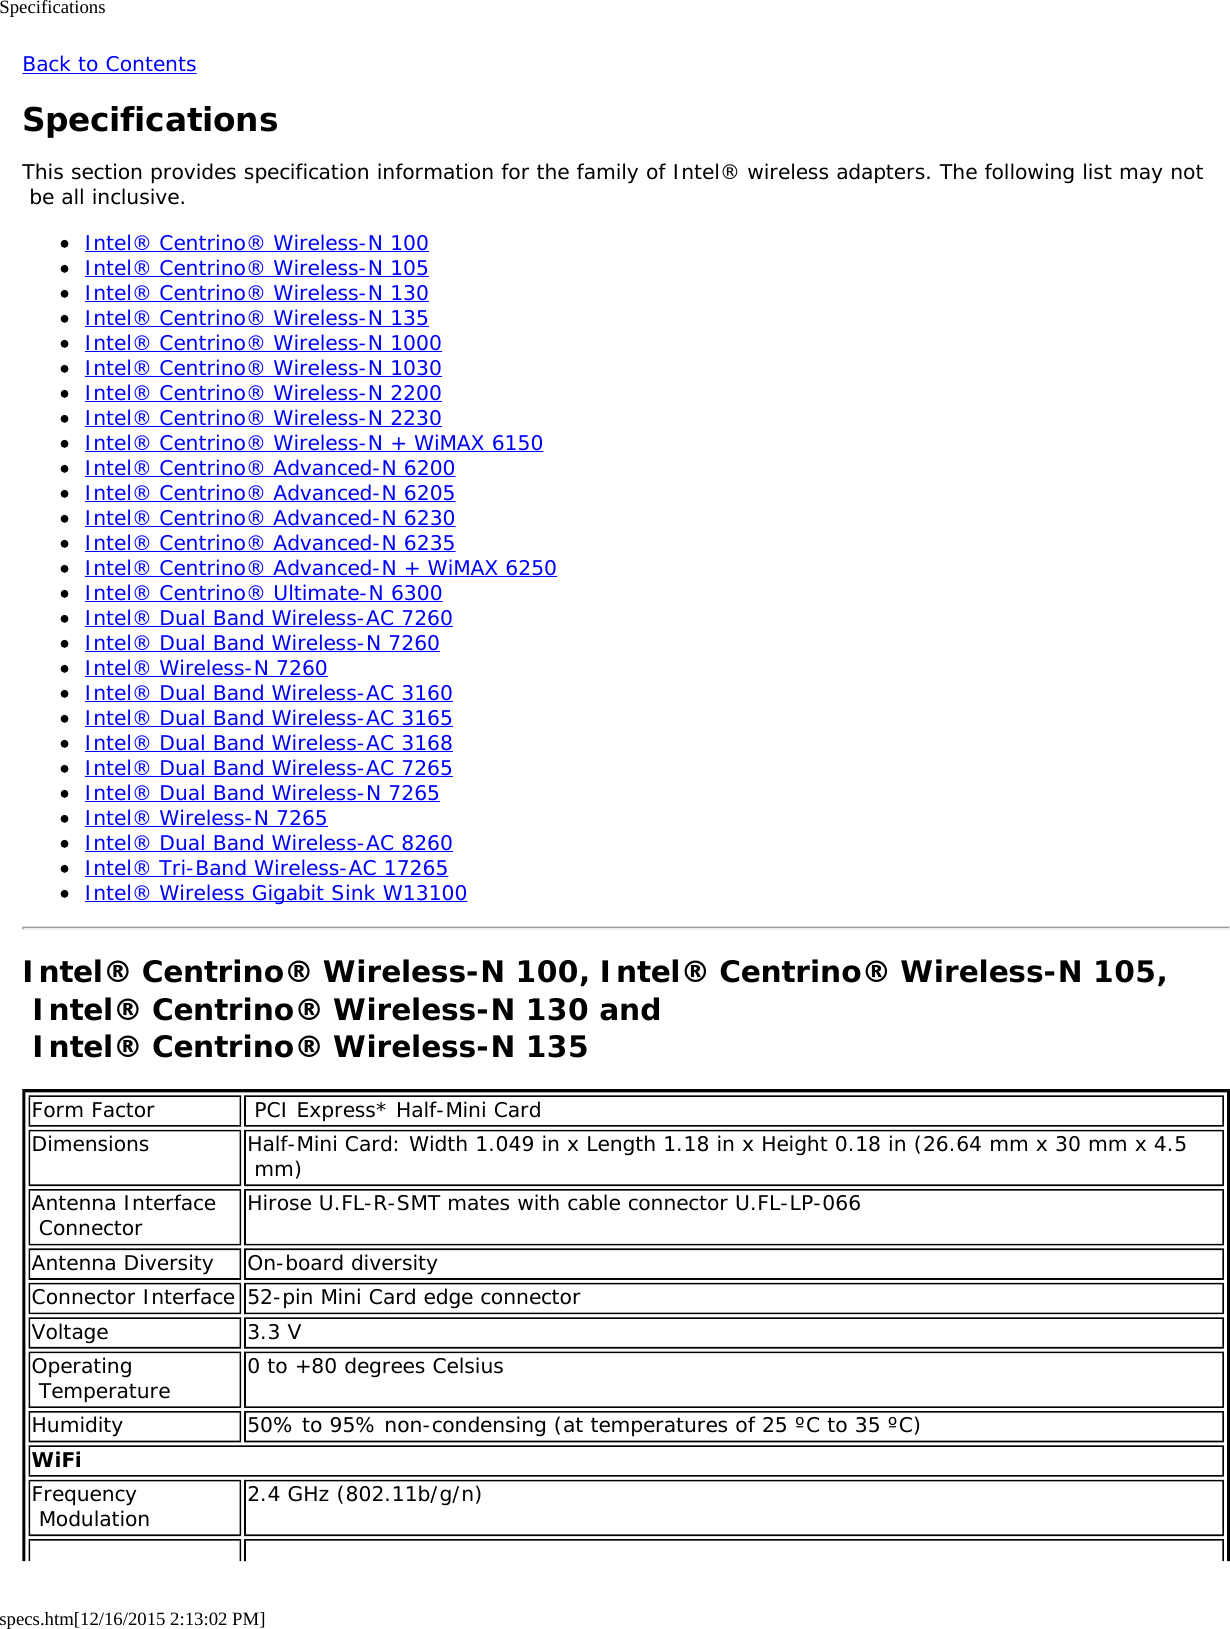 Specificationsspecs.htm[12/16/2015 2:13:02 PM]Back to ContentsSpecificationsThis section provides specification information for the family of Intel® wireless adapters. The following list may not be all inclusive.Intel® Centrino® Wireless-N 100Intel® Centrino® Wireless-N 105Intel® Centrino® Wireless-N 130Intel® Centrino® Wireless-N 135Intel® Centrino® Wireless-N 1000Intel® Centrino® Wireless-N 1030Intel® Centrino® Wireless-N 2200Intel® Centrino® Wireless-N 2230Intel® Centrino® Wireless-N + WiMAX 6150Intel® Centrino® Advanced-N 6200Intel® Centrino® Advanced-N 6205Intel® Centrino® Advanced-N 6230Intel® Centrino® Advanced-N 6235Intel® Centrino® Advanced-N + WiMAX 6250Intel® Centrino® Ultimate-N 6300Intel® Dual Band Wireless-AC 7260Intel® Dual Band Wireless-N 7260Intel® Wireless-N 7260Intel® Dual Band Wireless-AC 3160Intel® Dual Band Wireless-AC 3165Intel® Dual Band Wireless-AC 3168Intel® Dual Band Wireless-AC 7265Intel® Dual Band Wireless-N 7265Intel® Wireless-N 7265Intel® Dual Band Wireless-AC 8260Intel® Tri-Band Wireless-AC 17265Intel® Wireless Gigabit Sink W13100Intel® Centrino® Wireless-N 100, Intel® Centrino® Wireless-N 105, Intel® Centrino® Wireless-N 130 and  Intel® Centrino® Wireless-N 135Form Factor  PCI Express* Half-Mini CardDimensions Half-Mini Card: Width 1.049 in x Length 1.18 in x Height 0.18 in (26.64 mm x 30 mm x 4.5 mm)Antenna Interface Connector Hirose U.FL-R-SMT mates with cable connector U.FL-LP-066Antenna Diversity On-board diversityConnector Interface 52-pin Mini Card edge connectorVoltage 3.3 VOperating Temperature 0 to +80 degrees CelsiusHumidity 50% to 95% non-condensing (at temperatures of 25 ºC to 35 ºC)WiFiFrequency Modulation 2.4 GHz (802.11b/g/n)